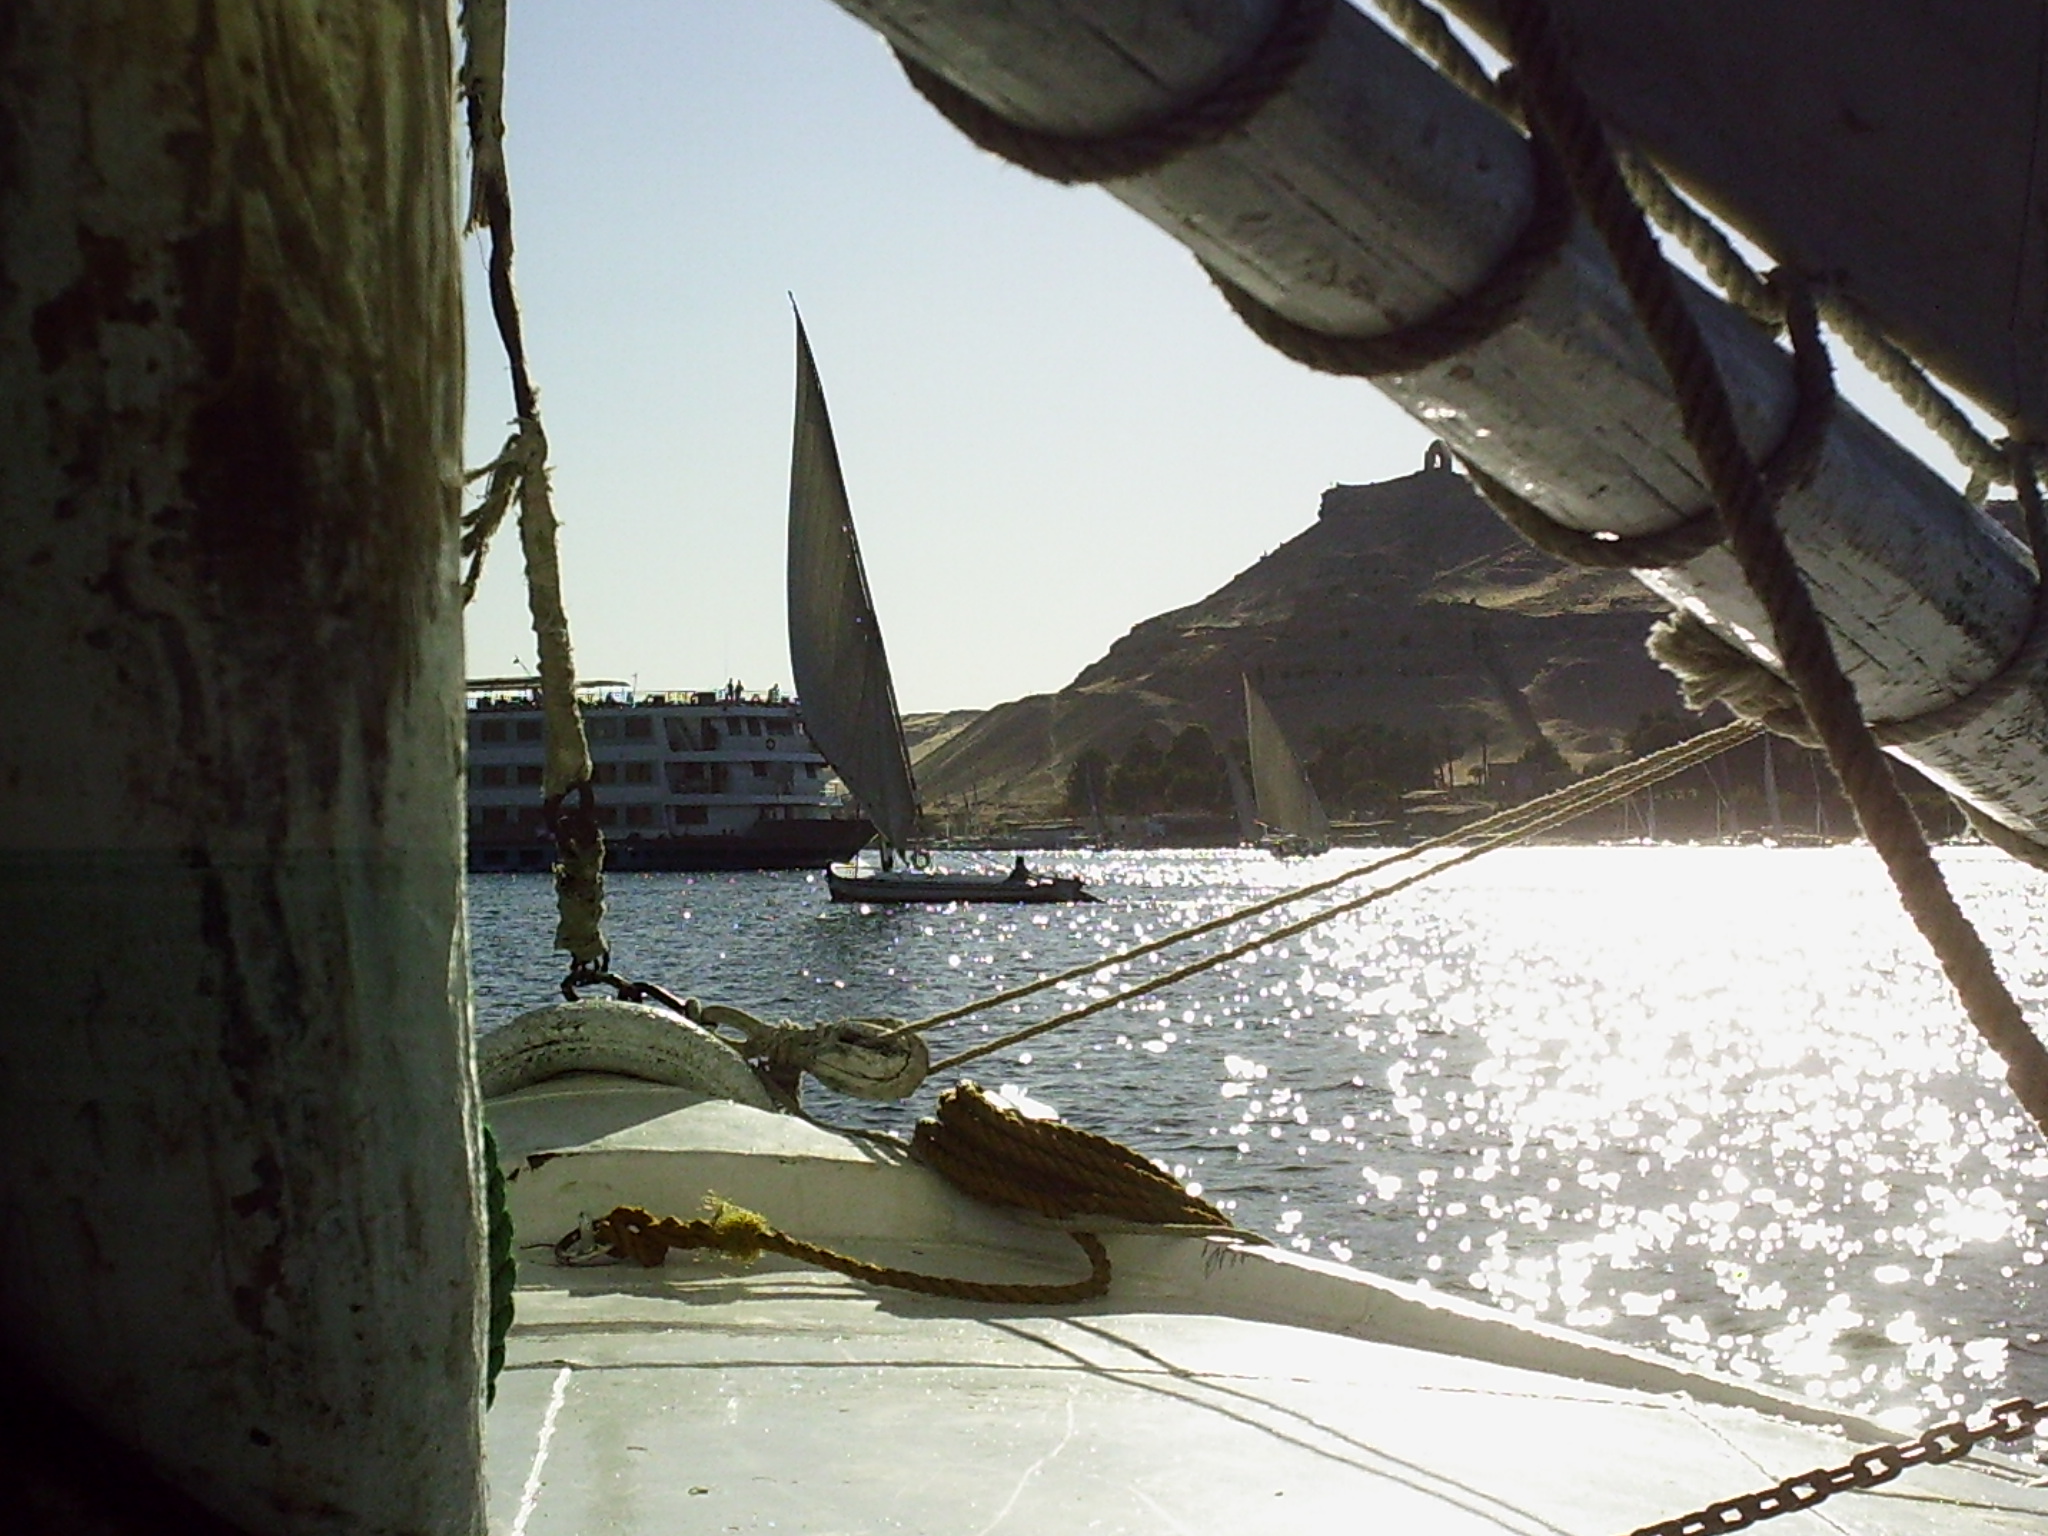  Our felucca riding the Nile 